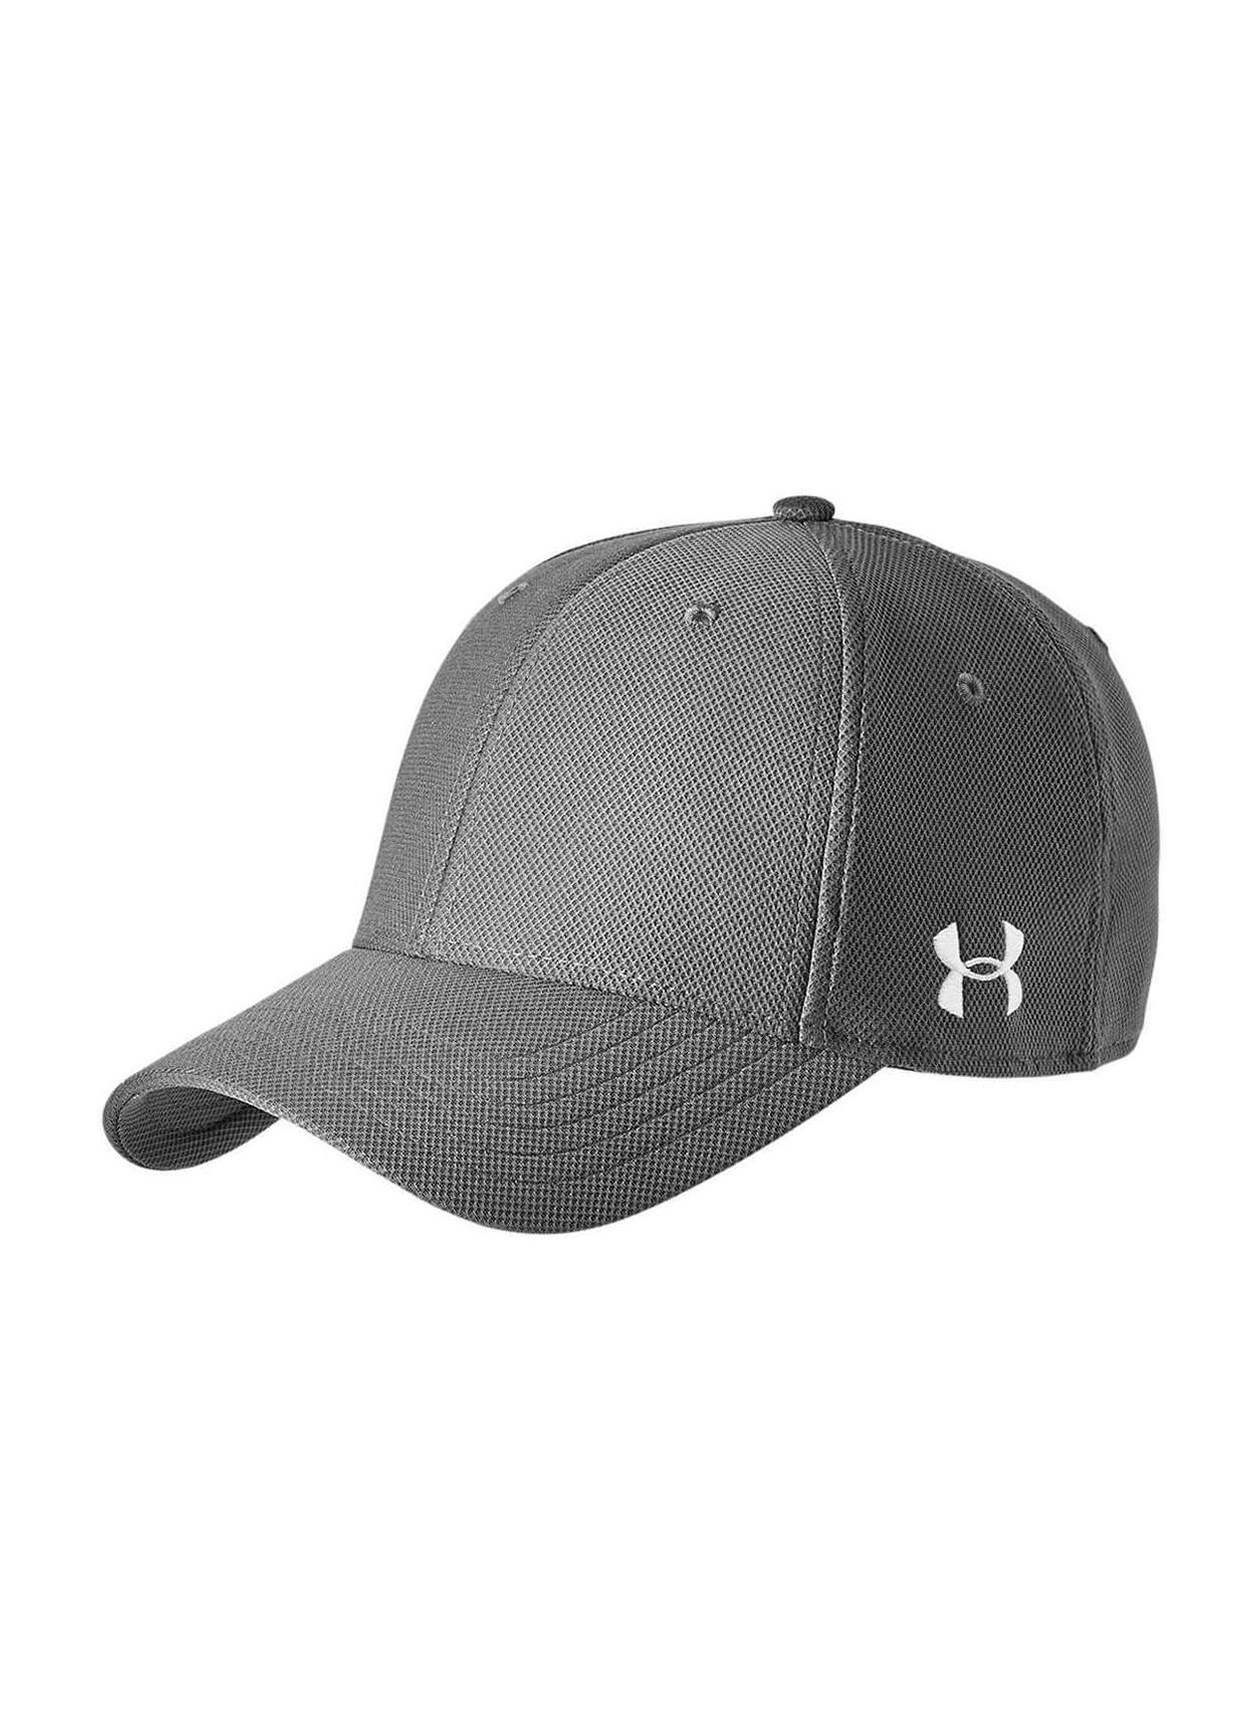 Graphite Under Armour Blitzing Curved Hat